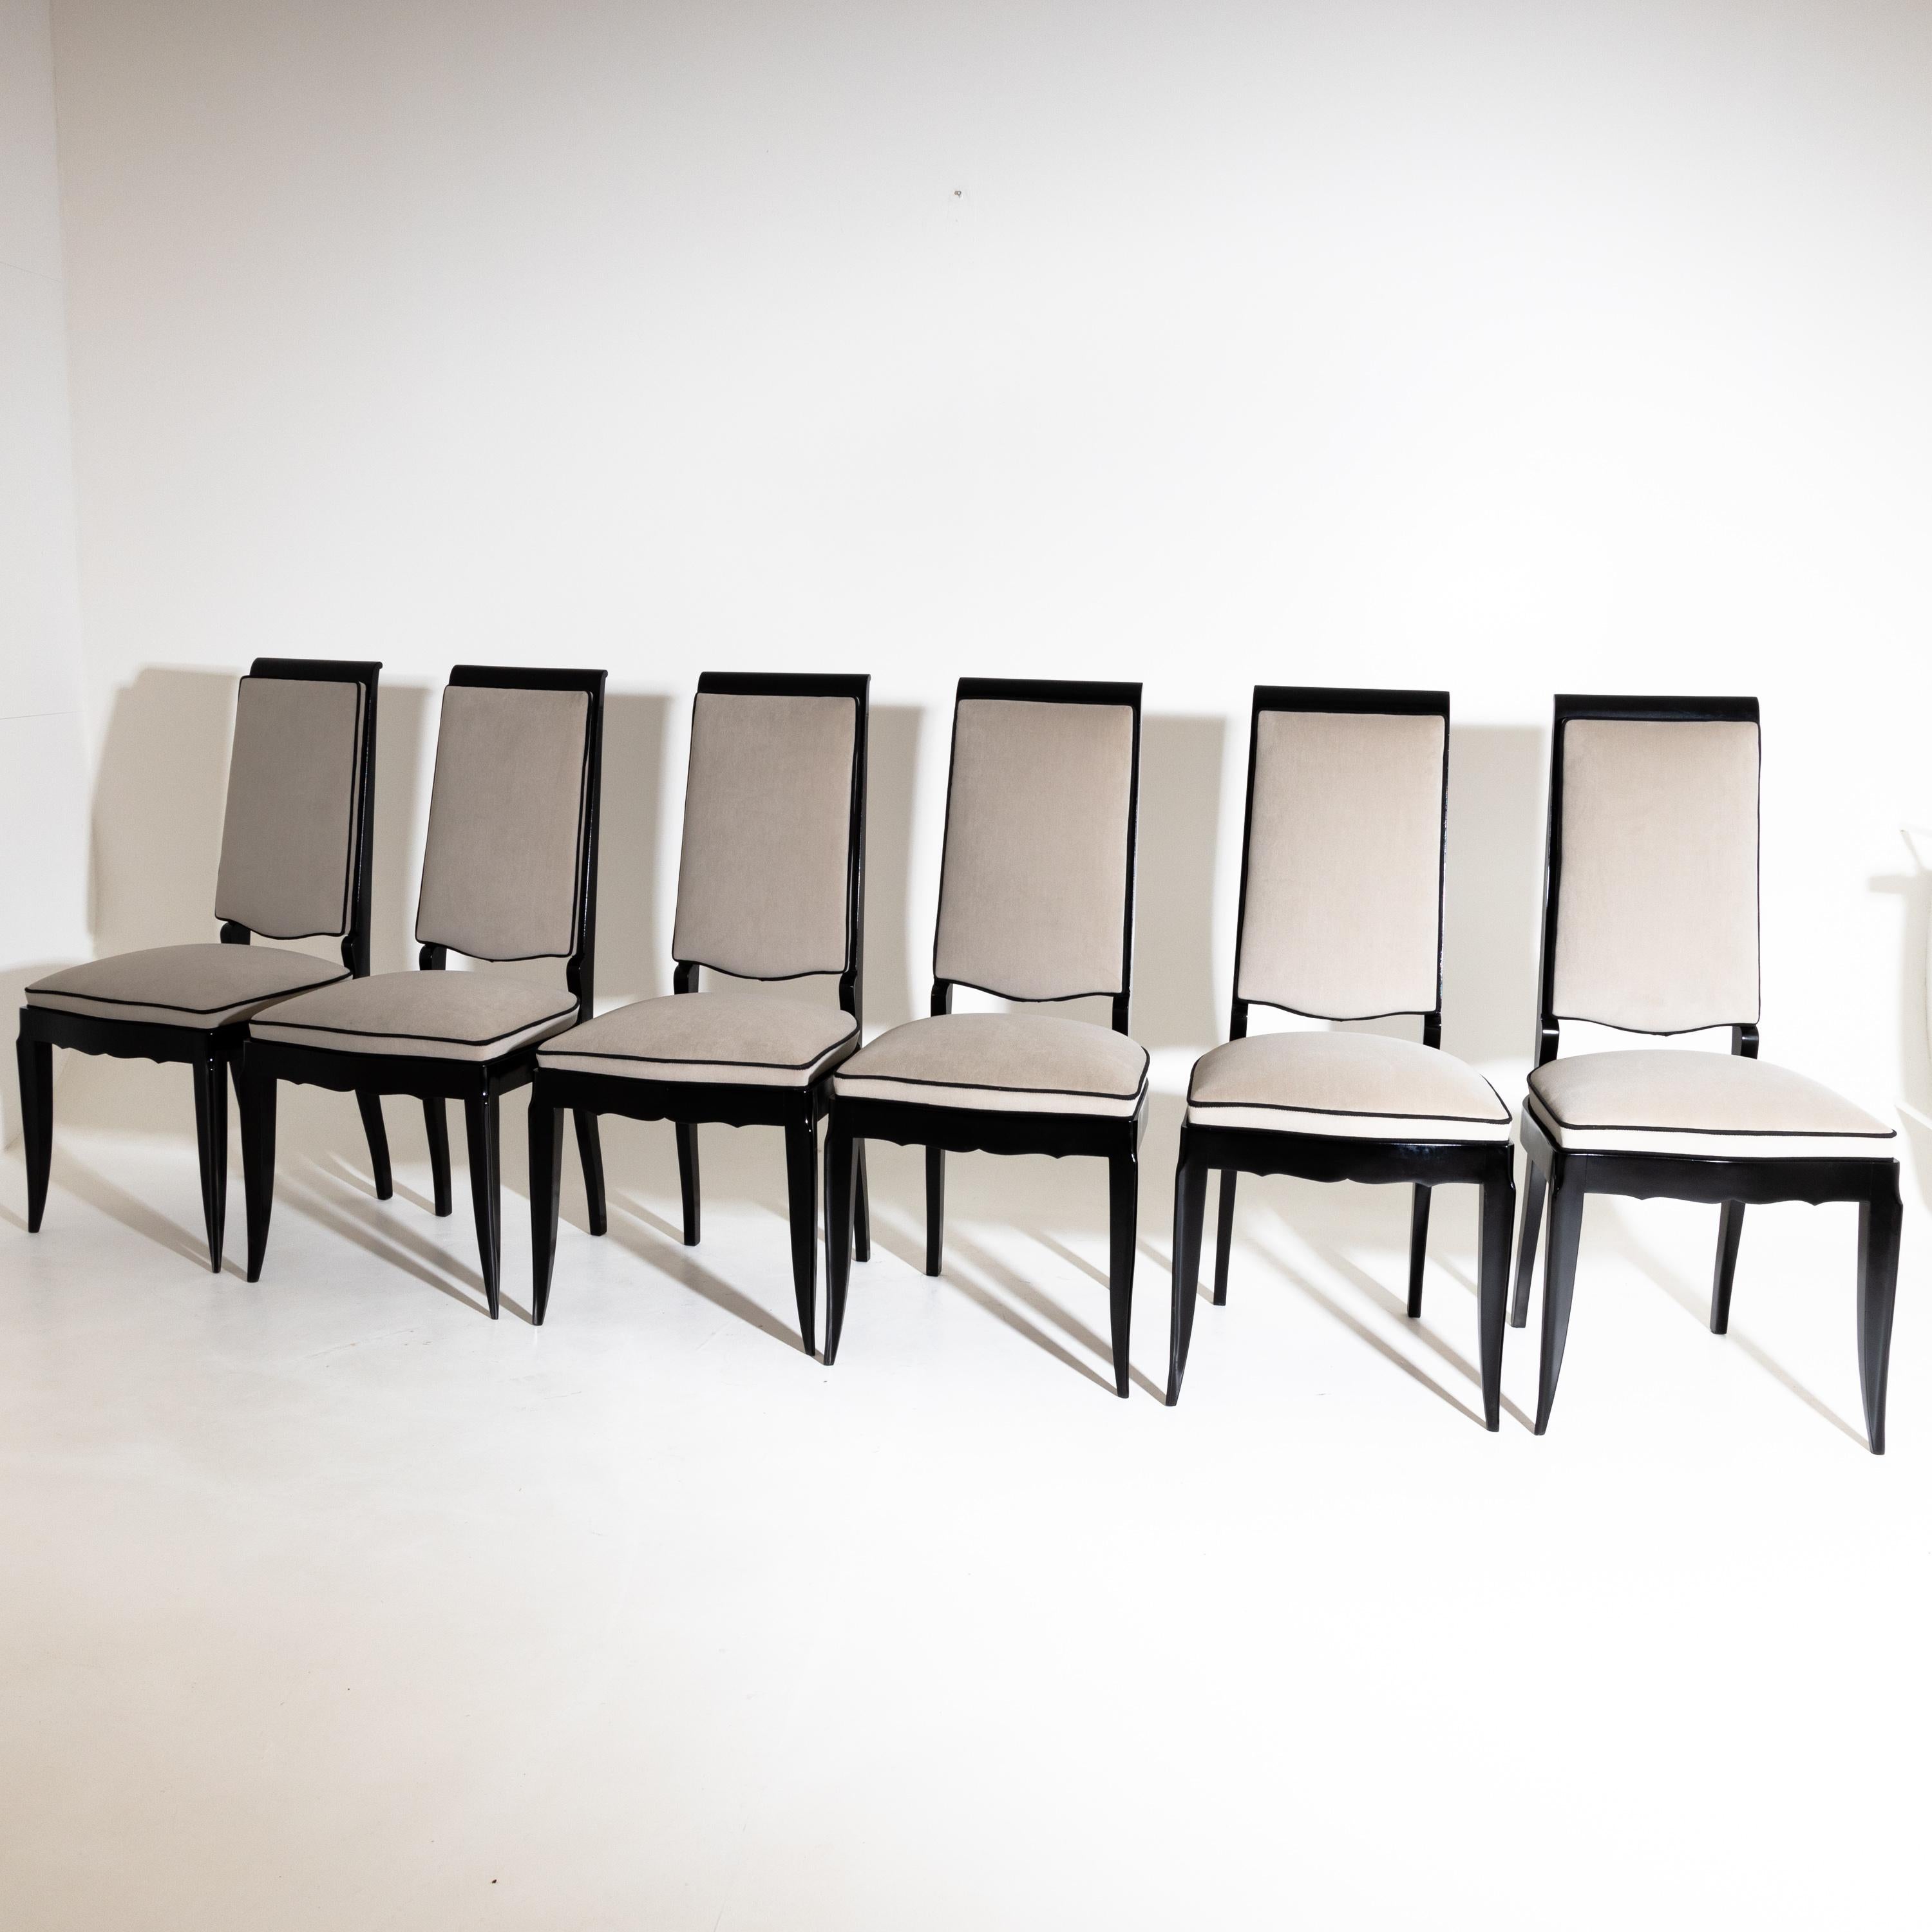 Set of six ebonized dining room chairs with curved frames and upholstered seats and backs. The chairs have been reupholstered in a grey velvet fabric with black piping and the frame hand polished.
   